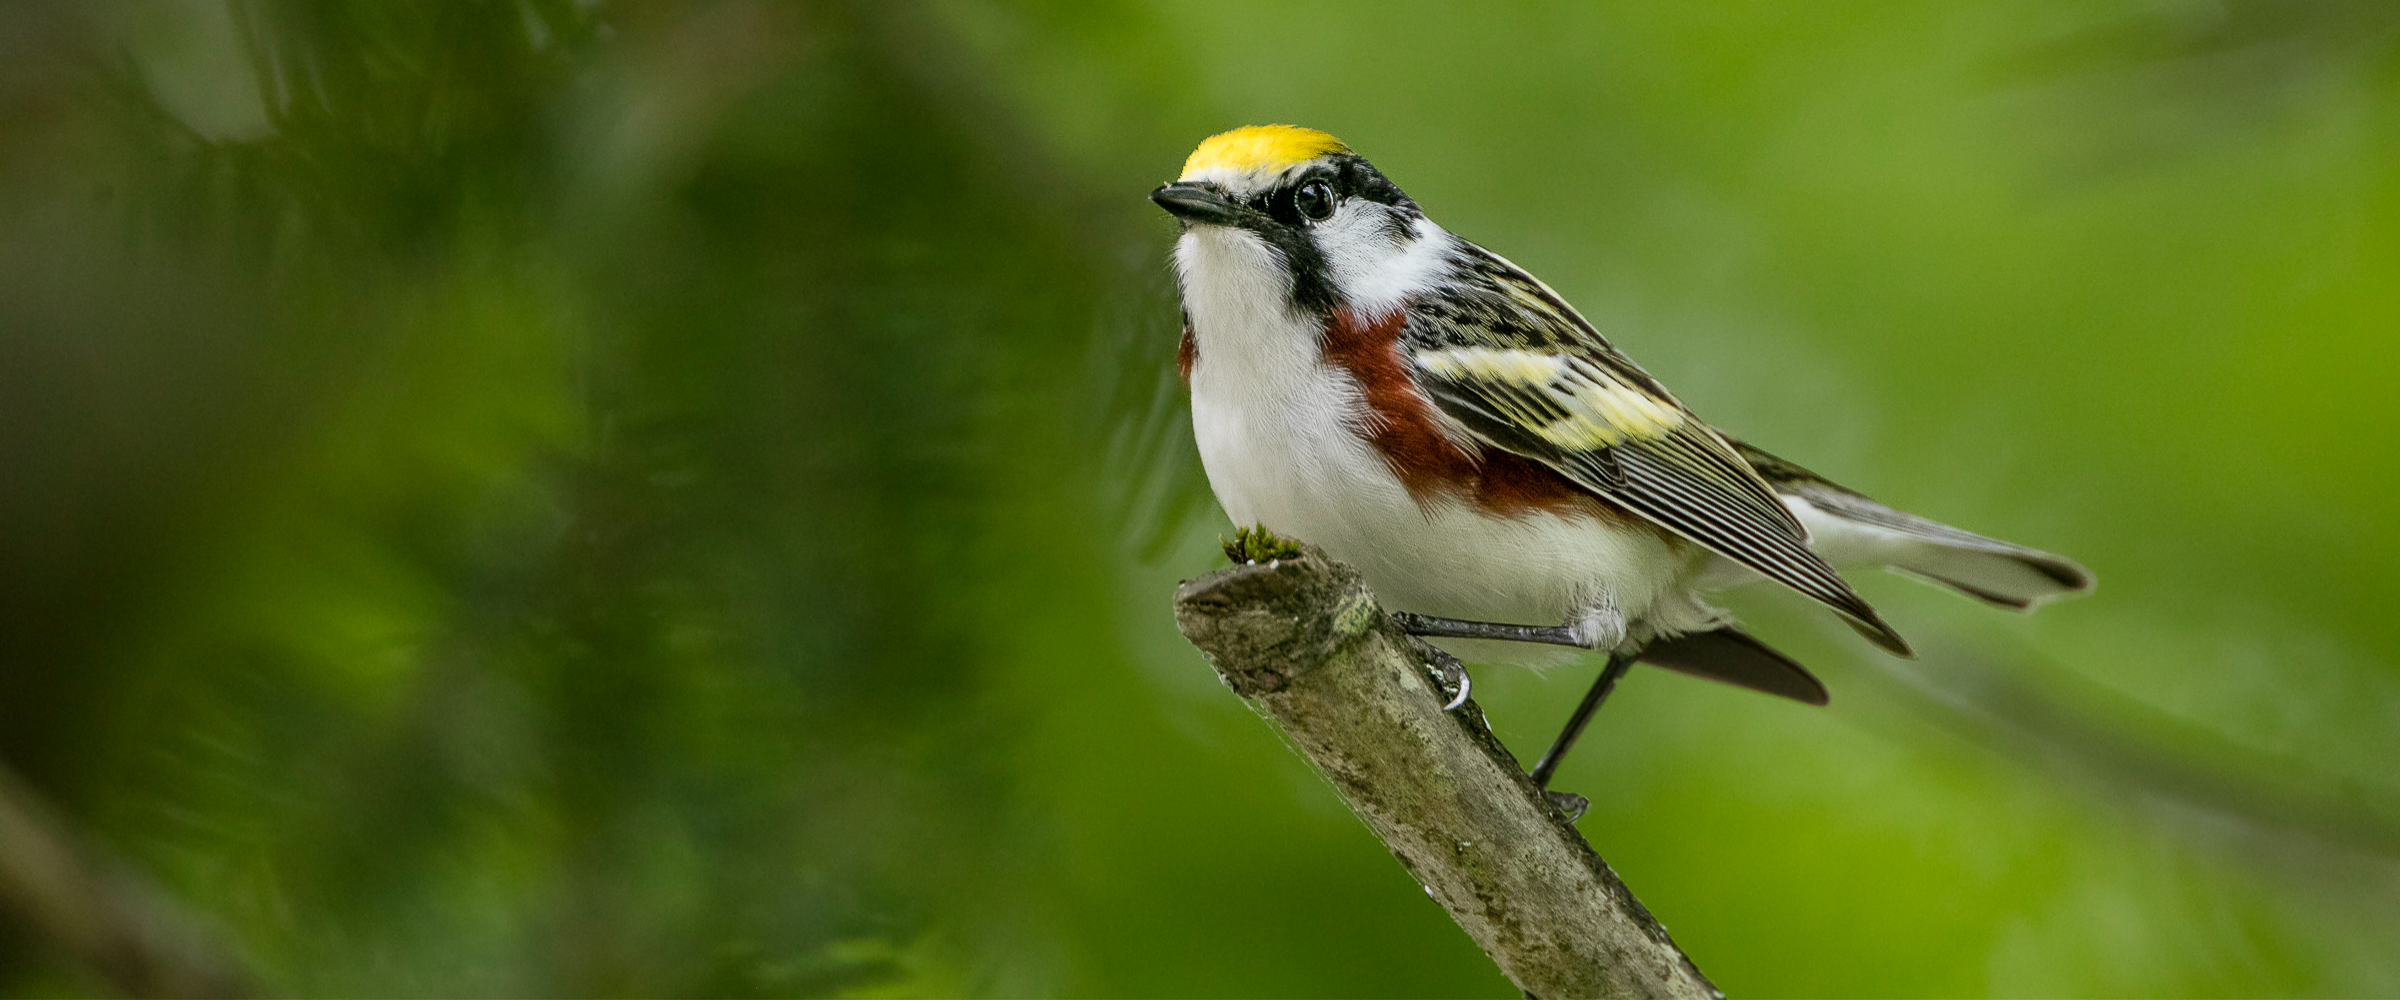 A male Chestnut-sided Warbler perches near the tip of a branch against a dark green background.